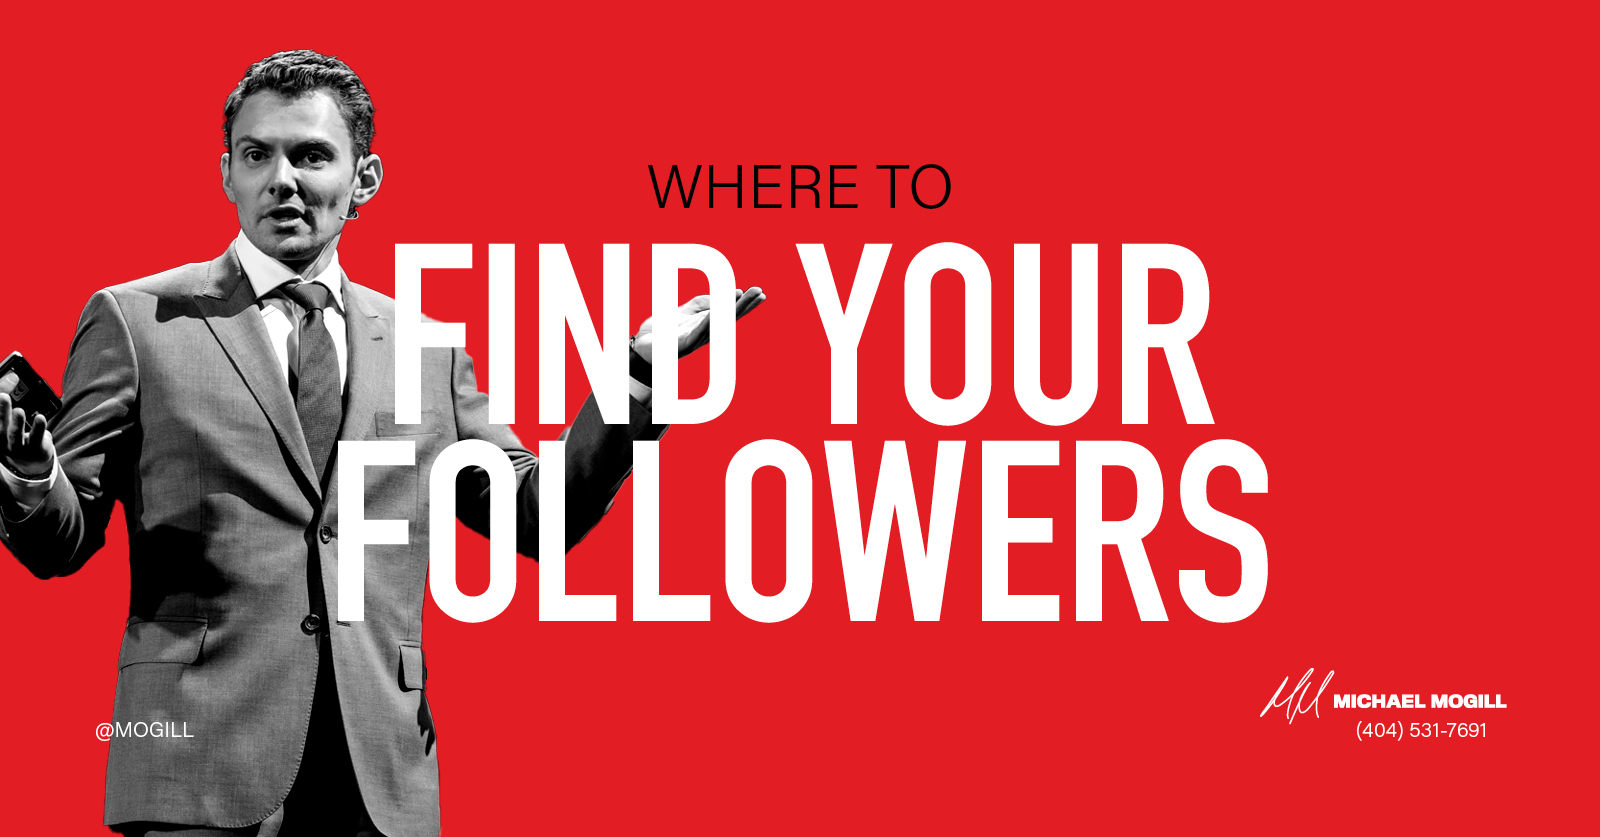 Where to Find Your Followers